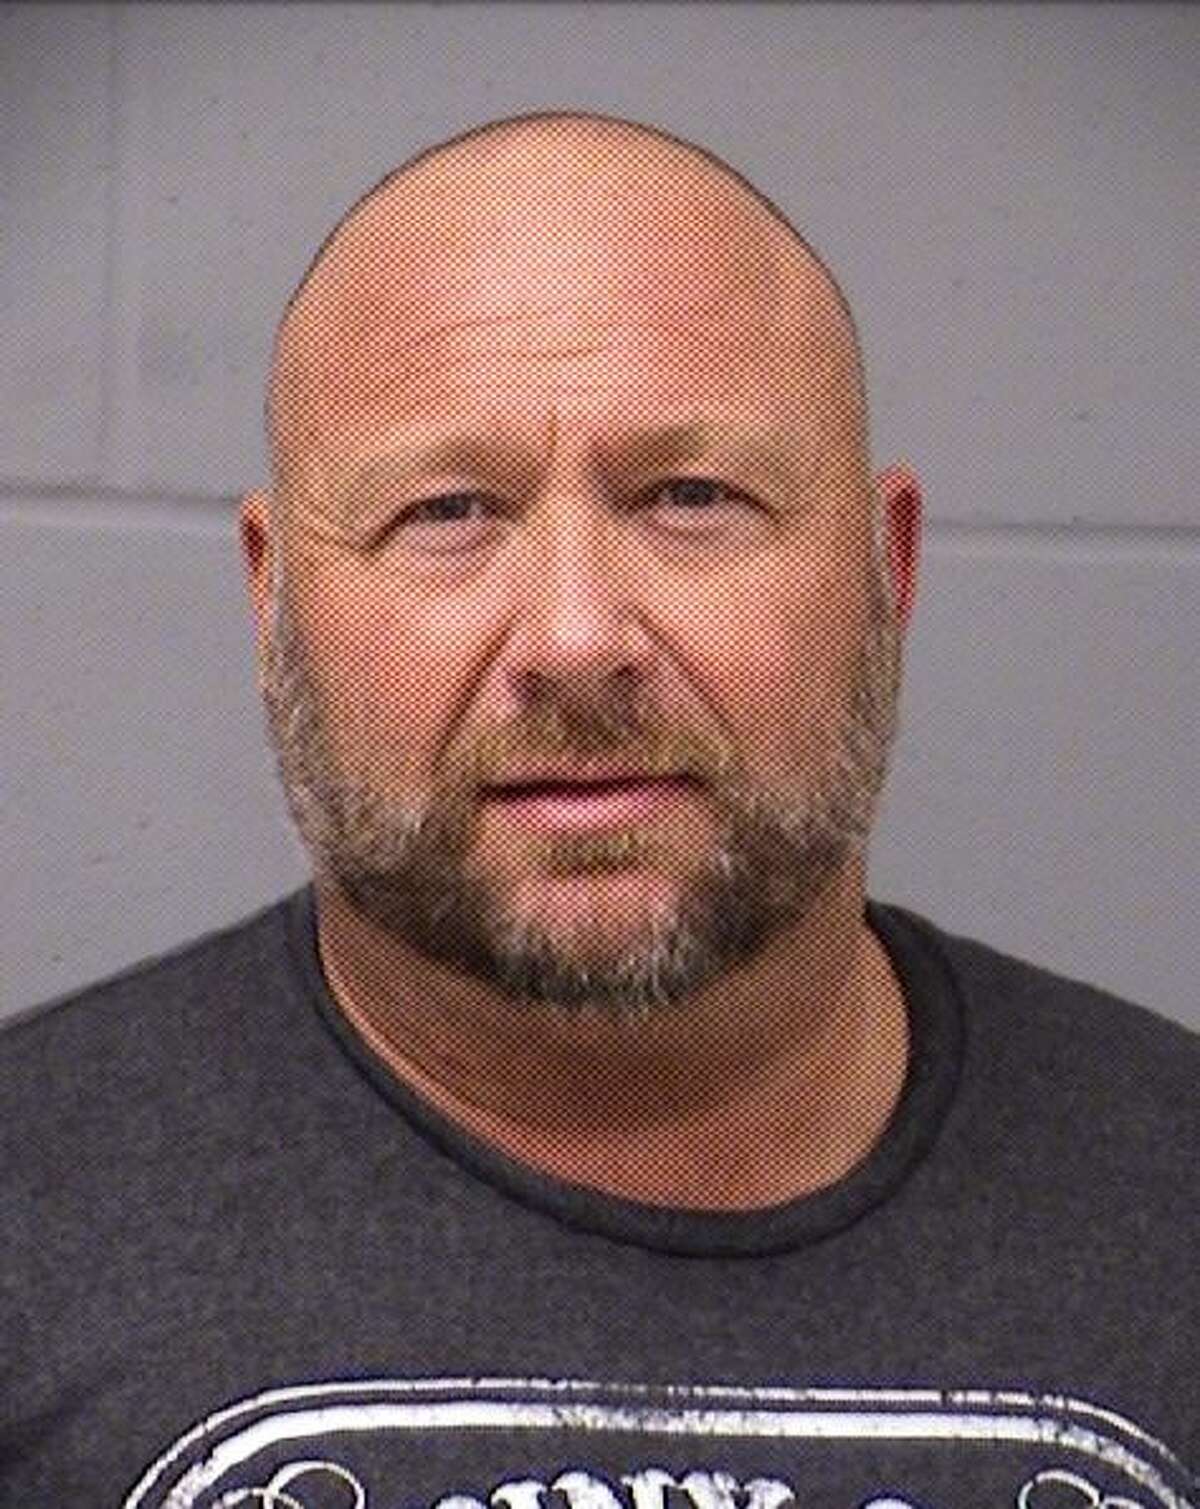 Conspiracy theorist Alex Jones was arrested on charges of driving while intoxicated early Tuesday morning, according to the Travis County Sheriff's Office.